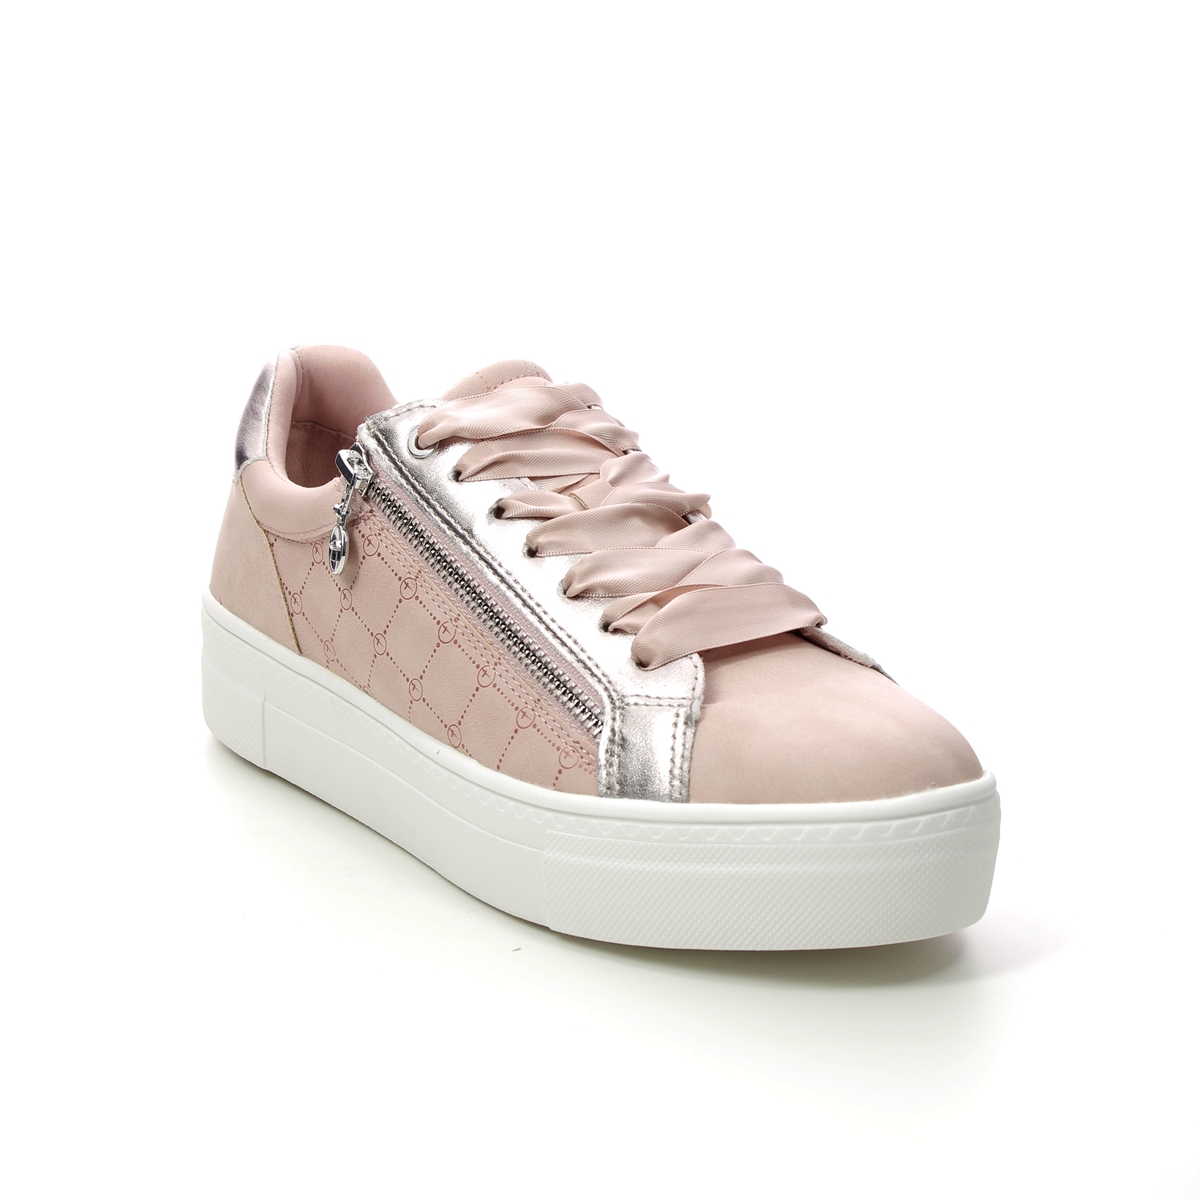 Tamaris Lima Zip Rose gold Womens trainers 23313-28-596 in a Plain Man-made in Size 37